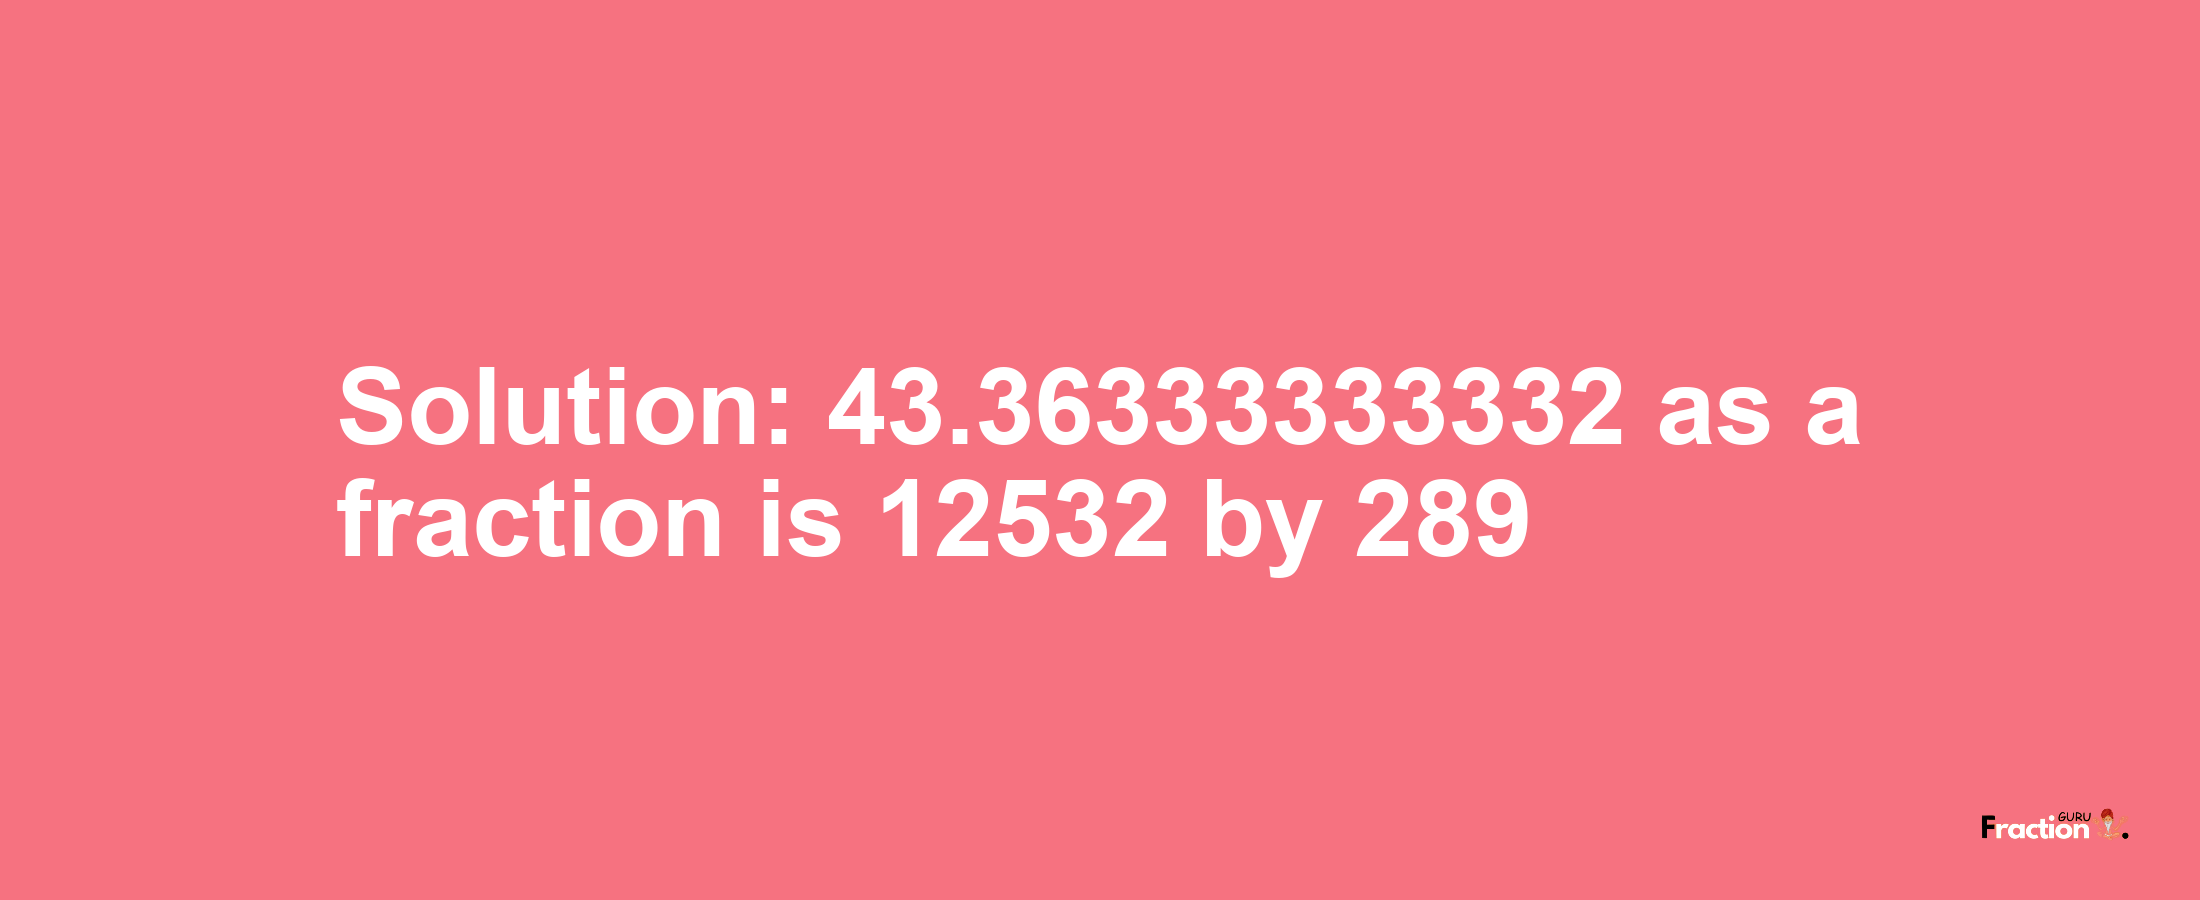 Solution:43.36333333332 as a fraction is 12532/289